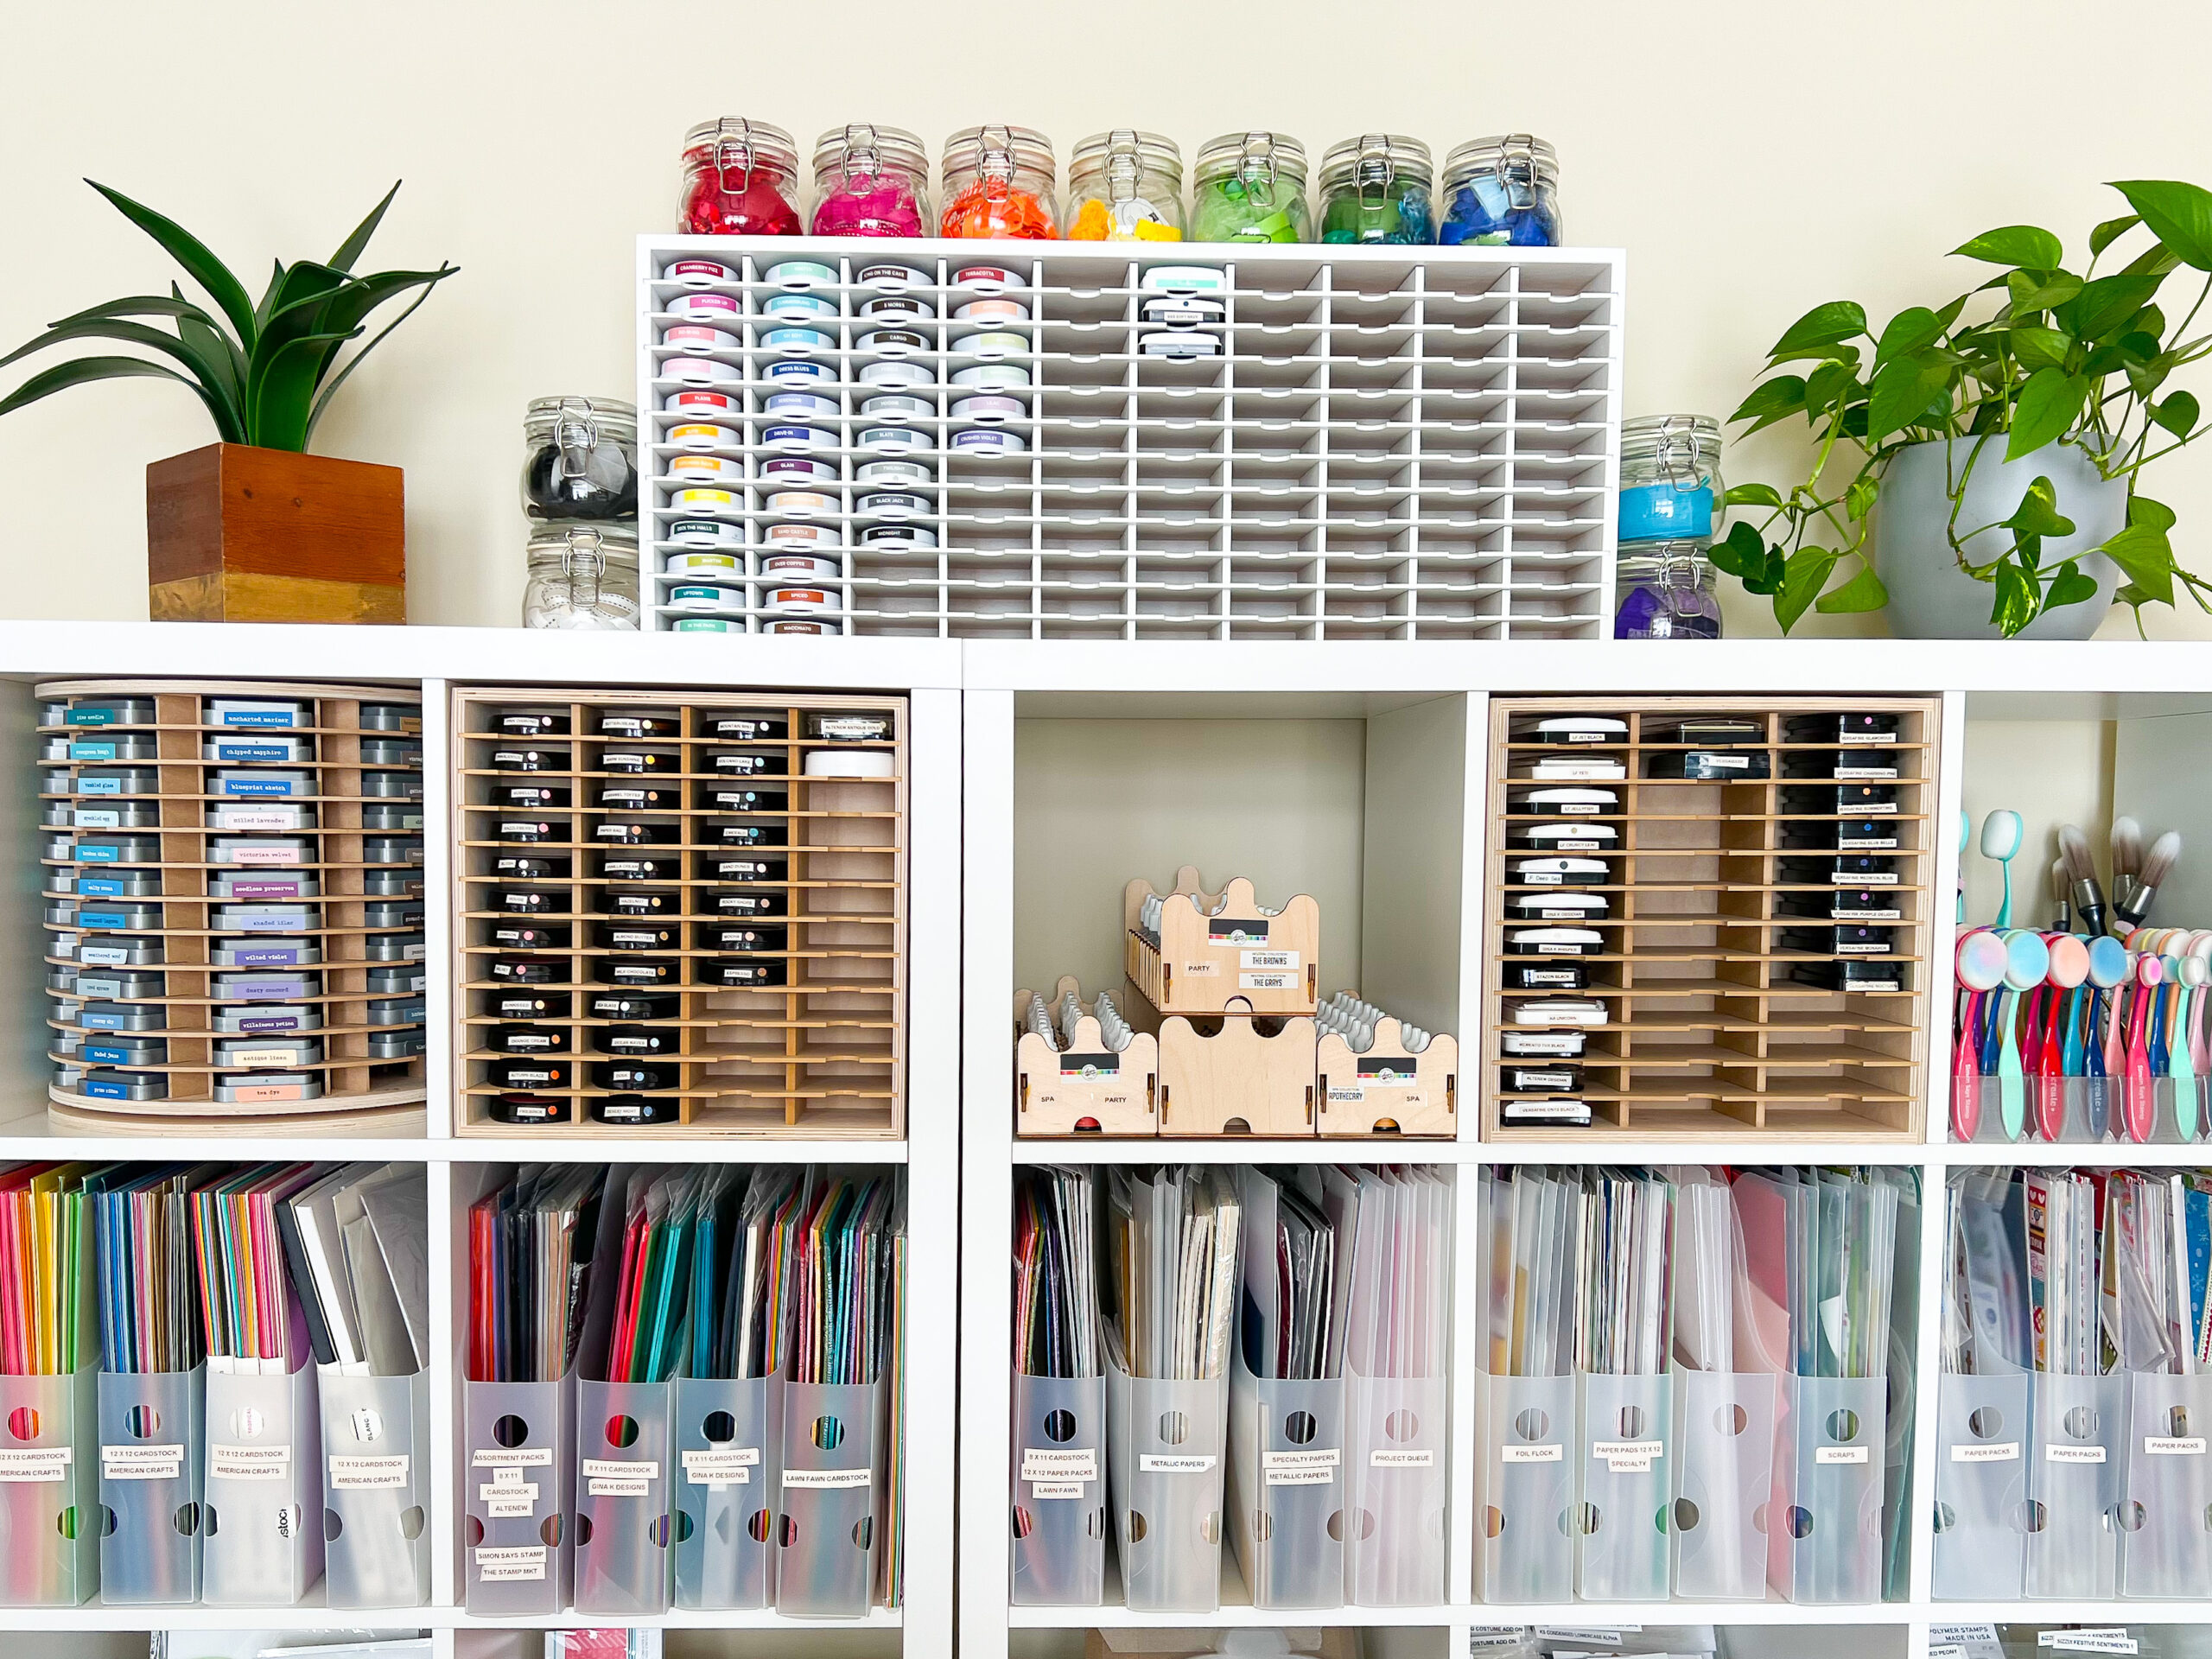 This $20 Ink Pad Storage Is AWESOME! - Craft Room Organization